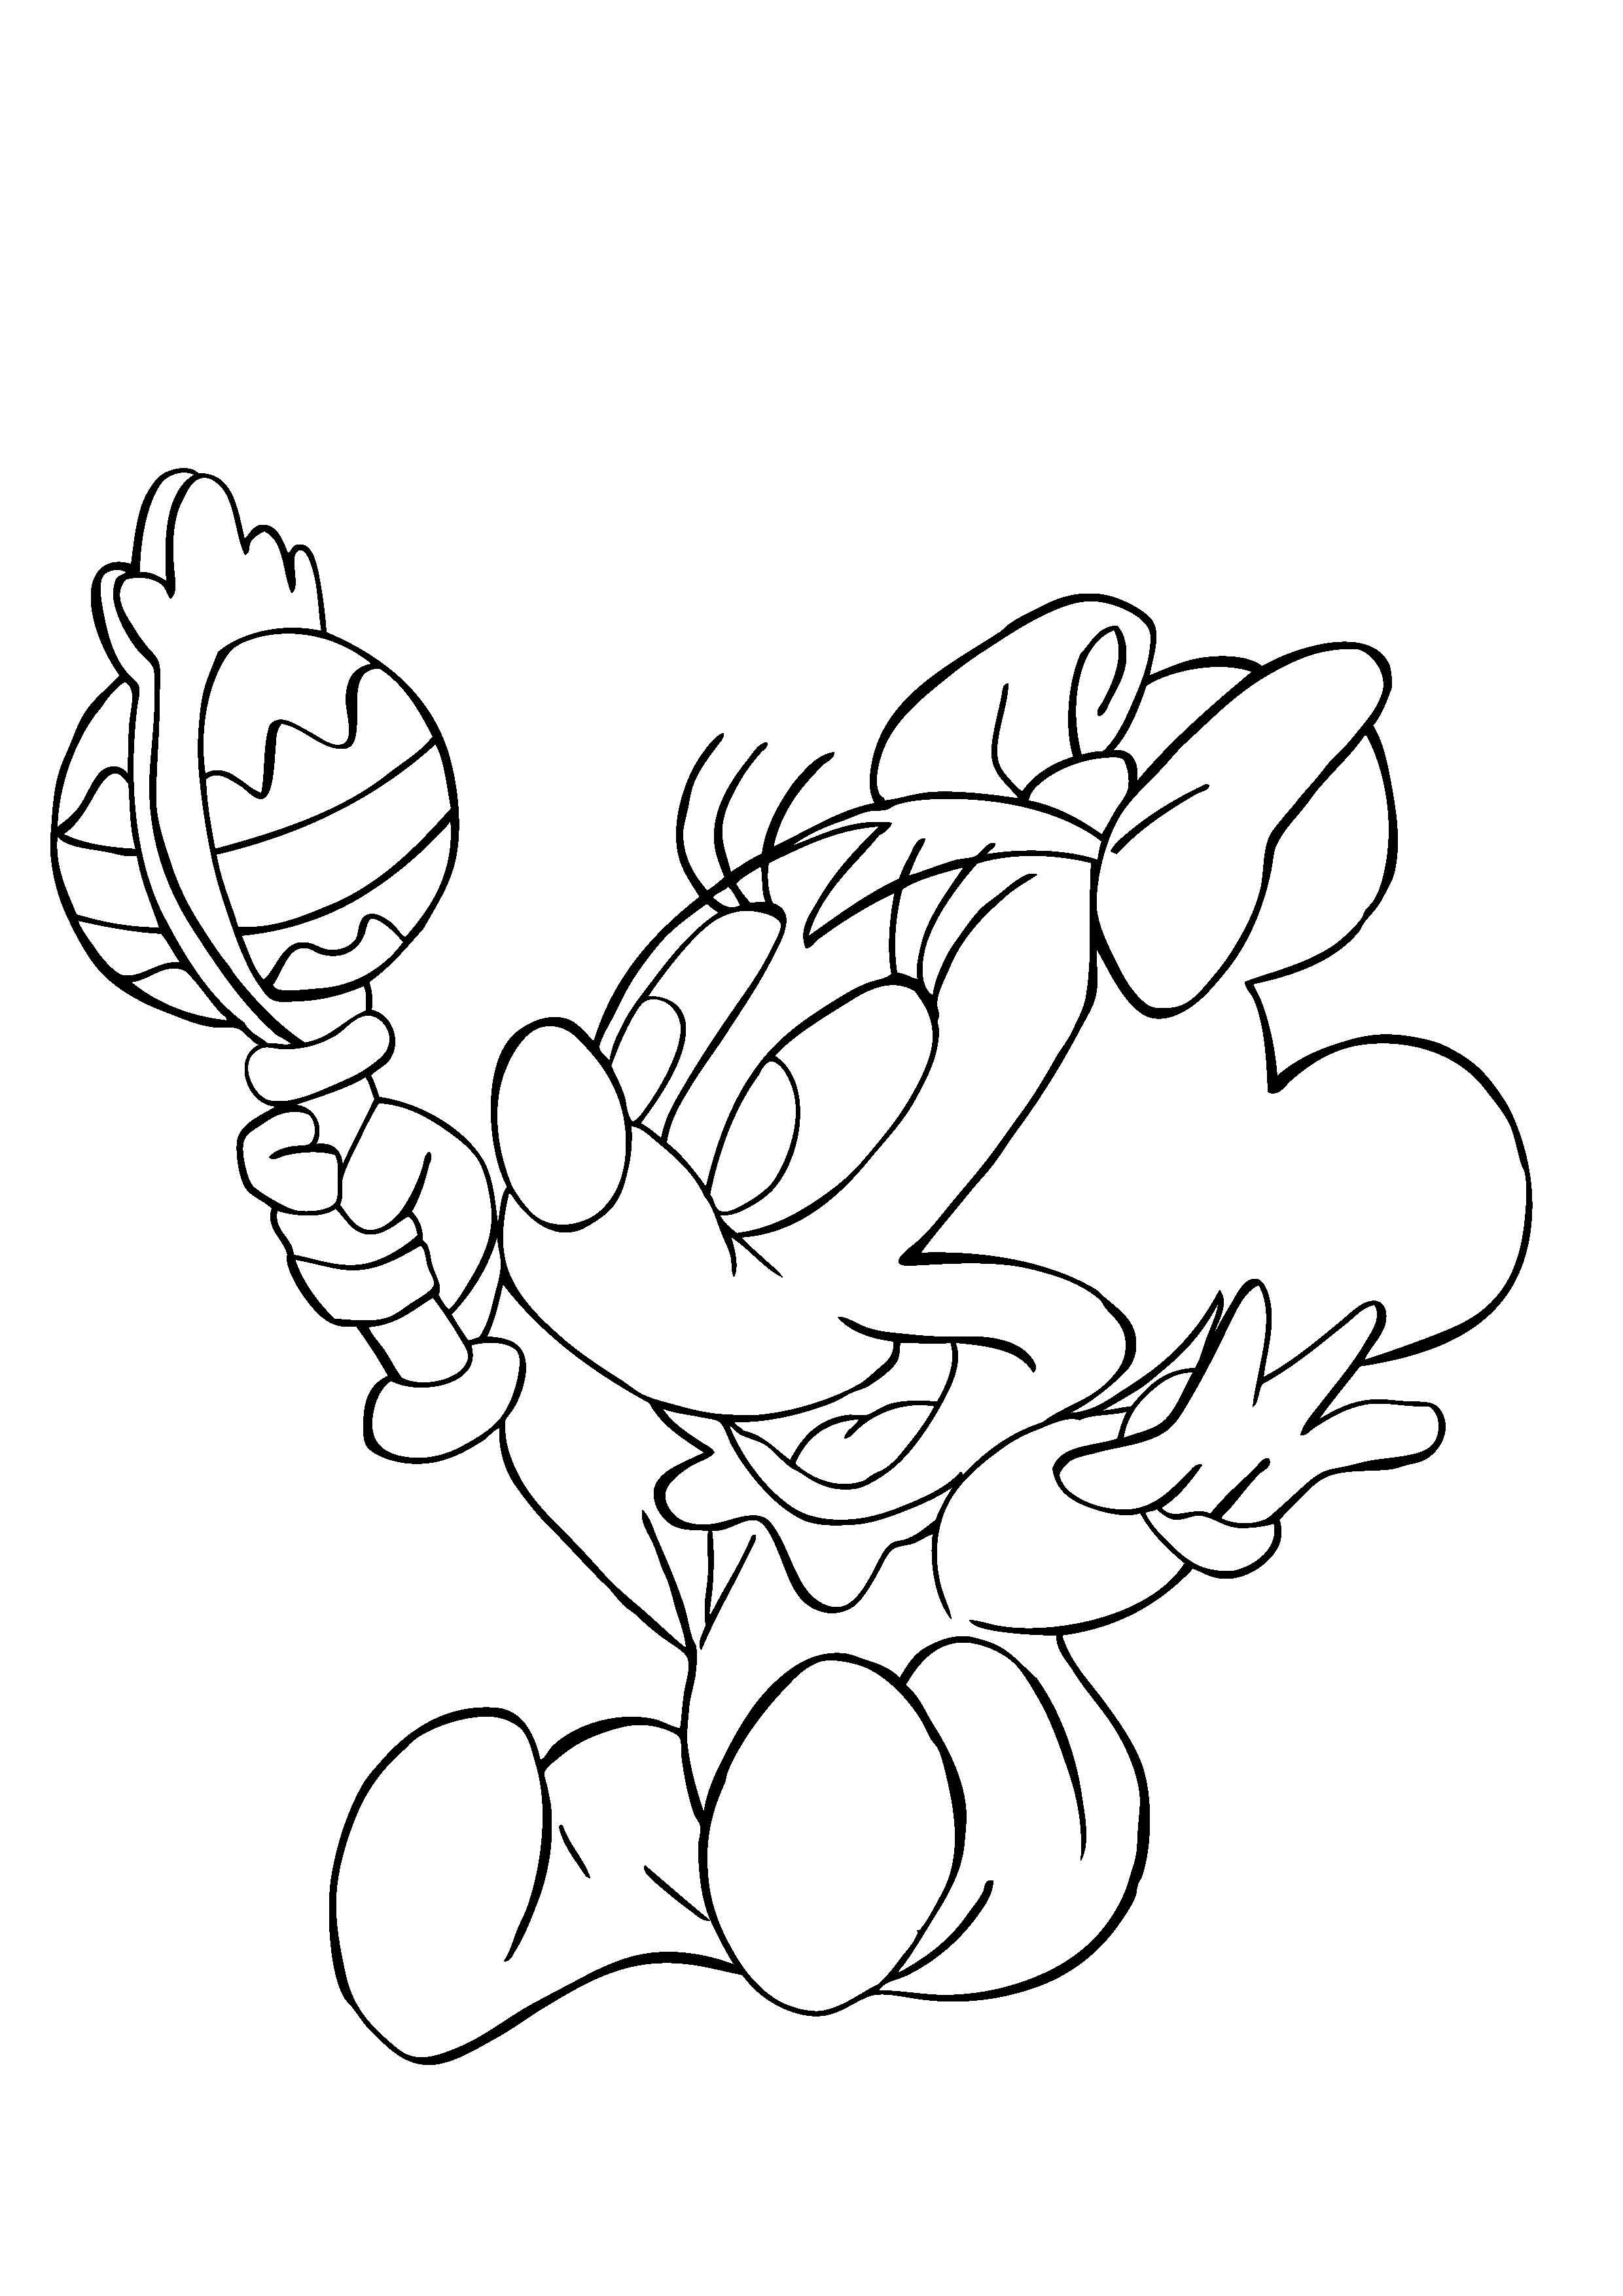 Baby Rattle Coloring Page at GetColorings.com | Free printable